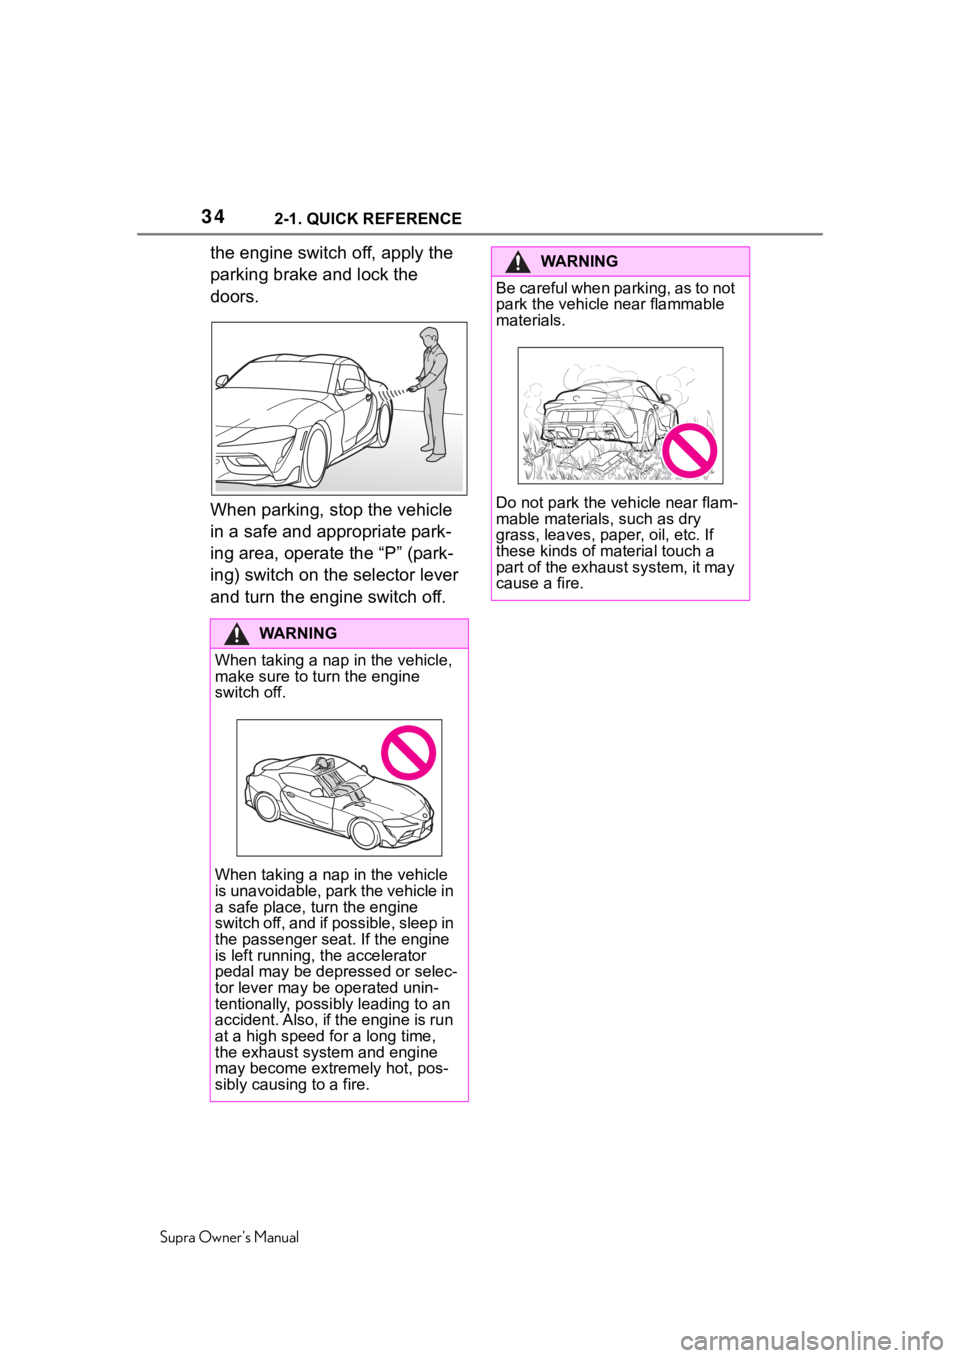 TOYOTA SUPRA 2020  Owners Manual (in English) 342-1. QUICK REFERENCE
Supra Owners Manual
the engine switch off, apply the 
parking brake and lock the 
doors.
When parking, stop the vehicle 
in a safe and appropriate park-
ing area, operate the �